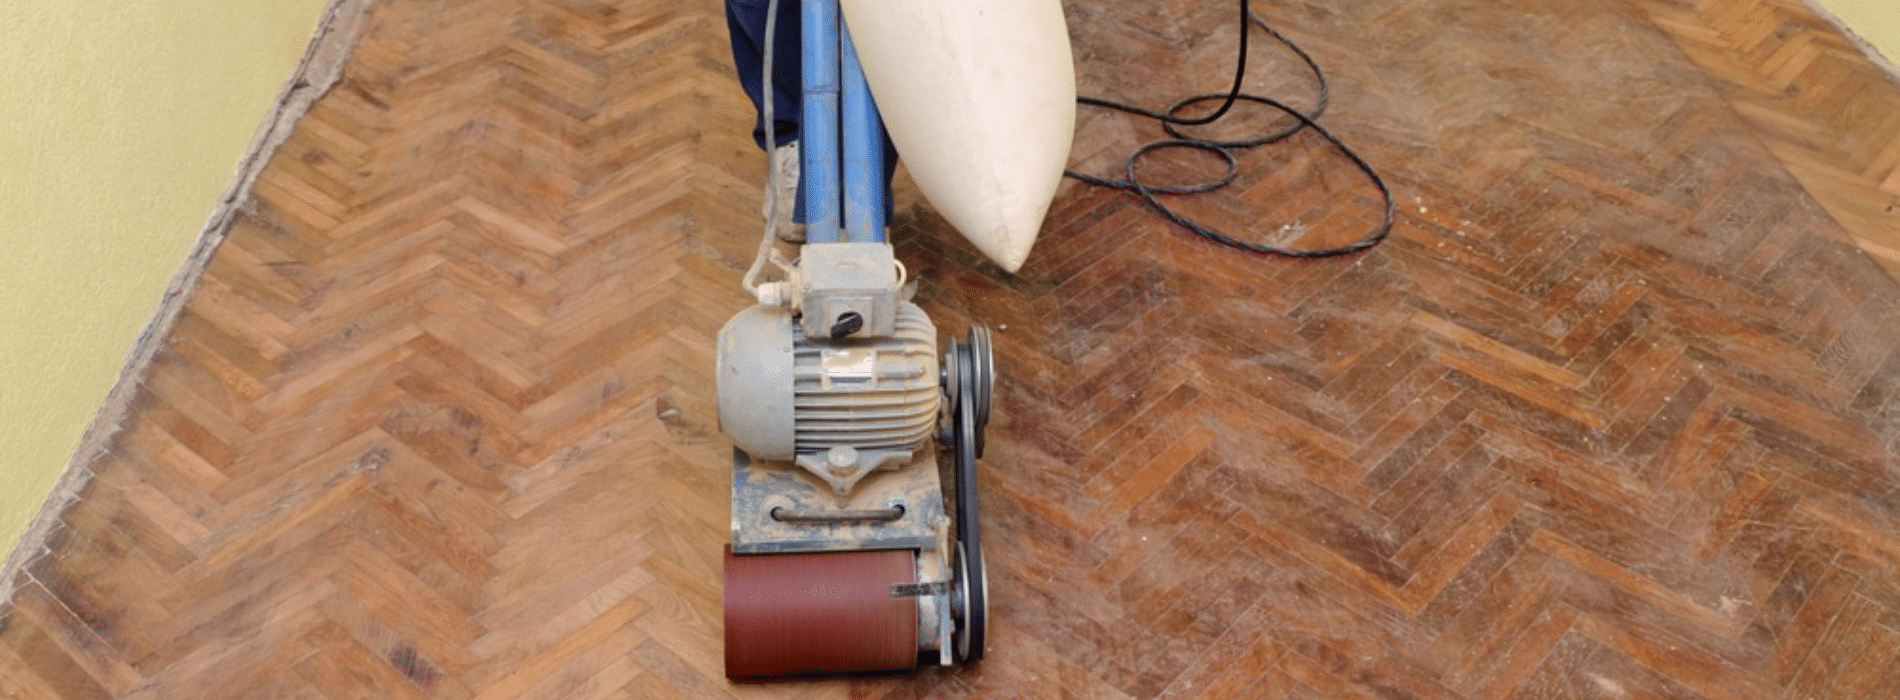 In Keston, BR2, Mr Sander® use a Bona Belt Effect (2.2 kW) sander, operating at 230V and 50Hz/60Hz, to sand herringbone floors. The 250x750 mm sander, connected to a dust extraction system with a HEPA filter, ensures a clean and efficient result. 